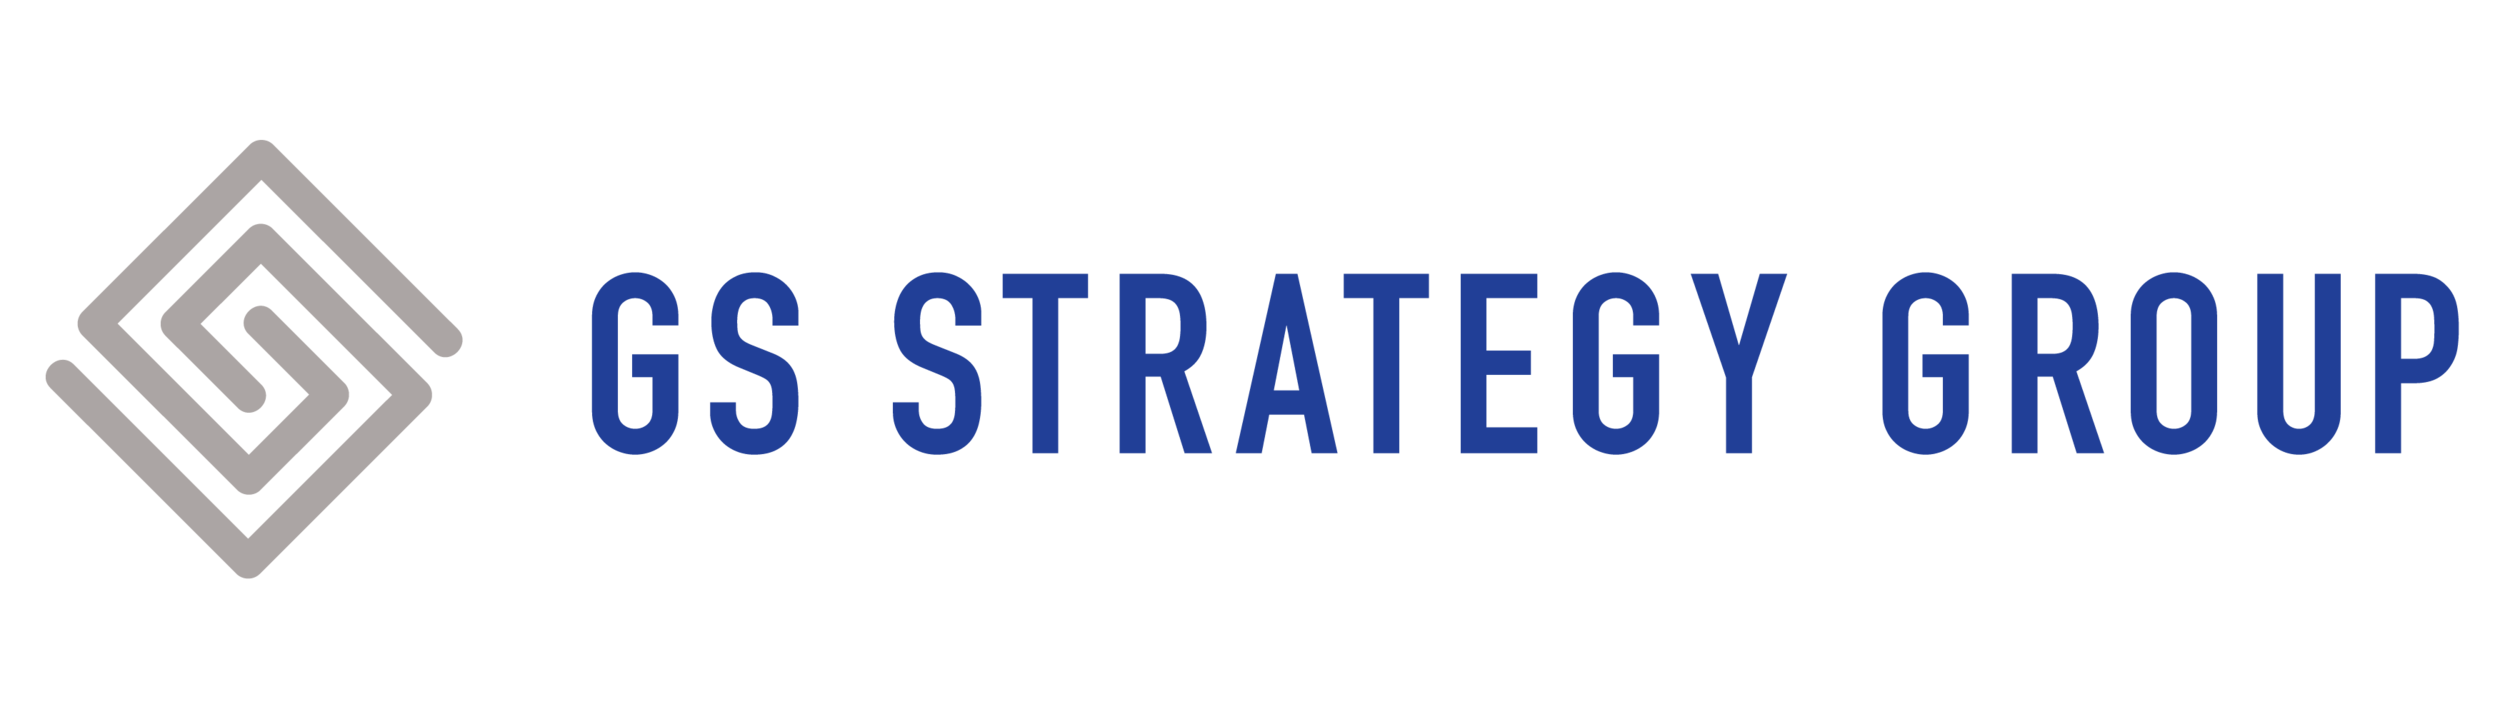 GS STRATEGY GROUP